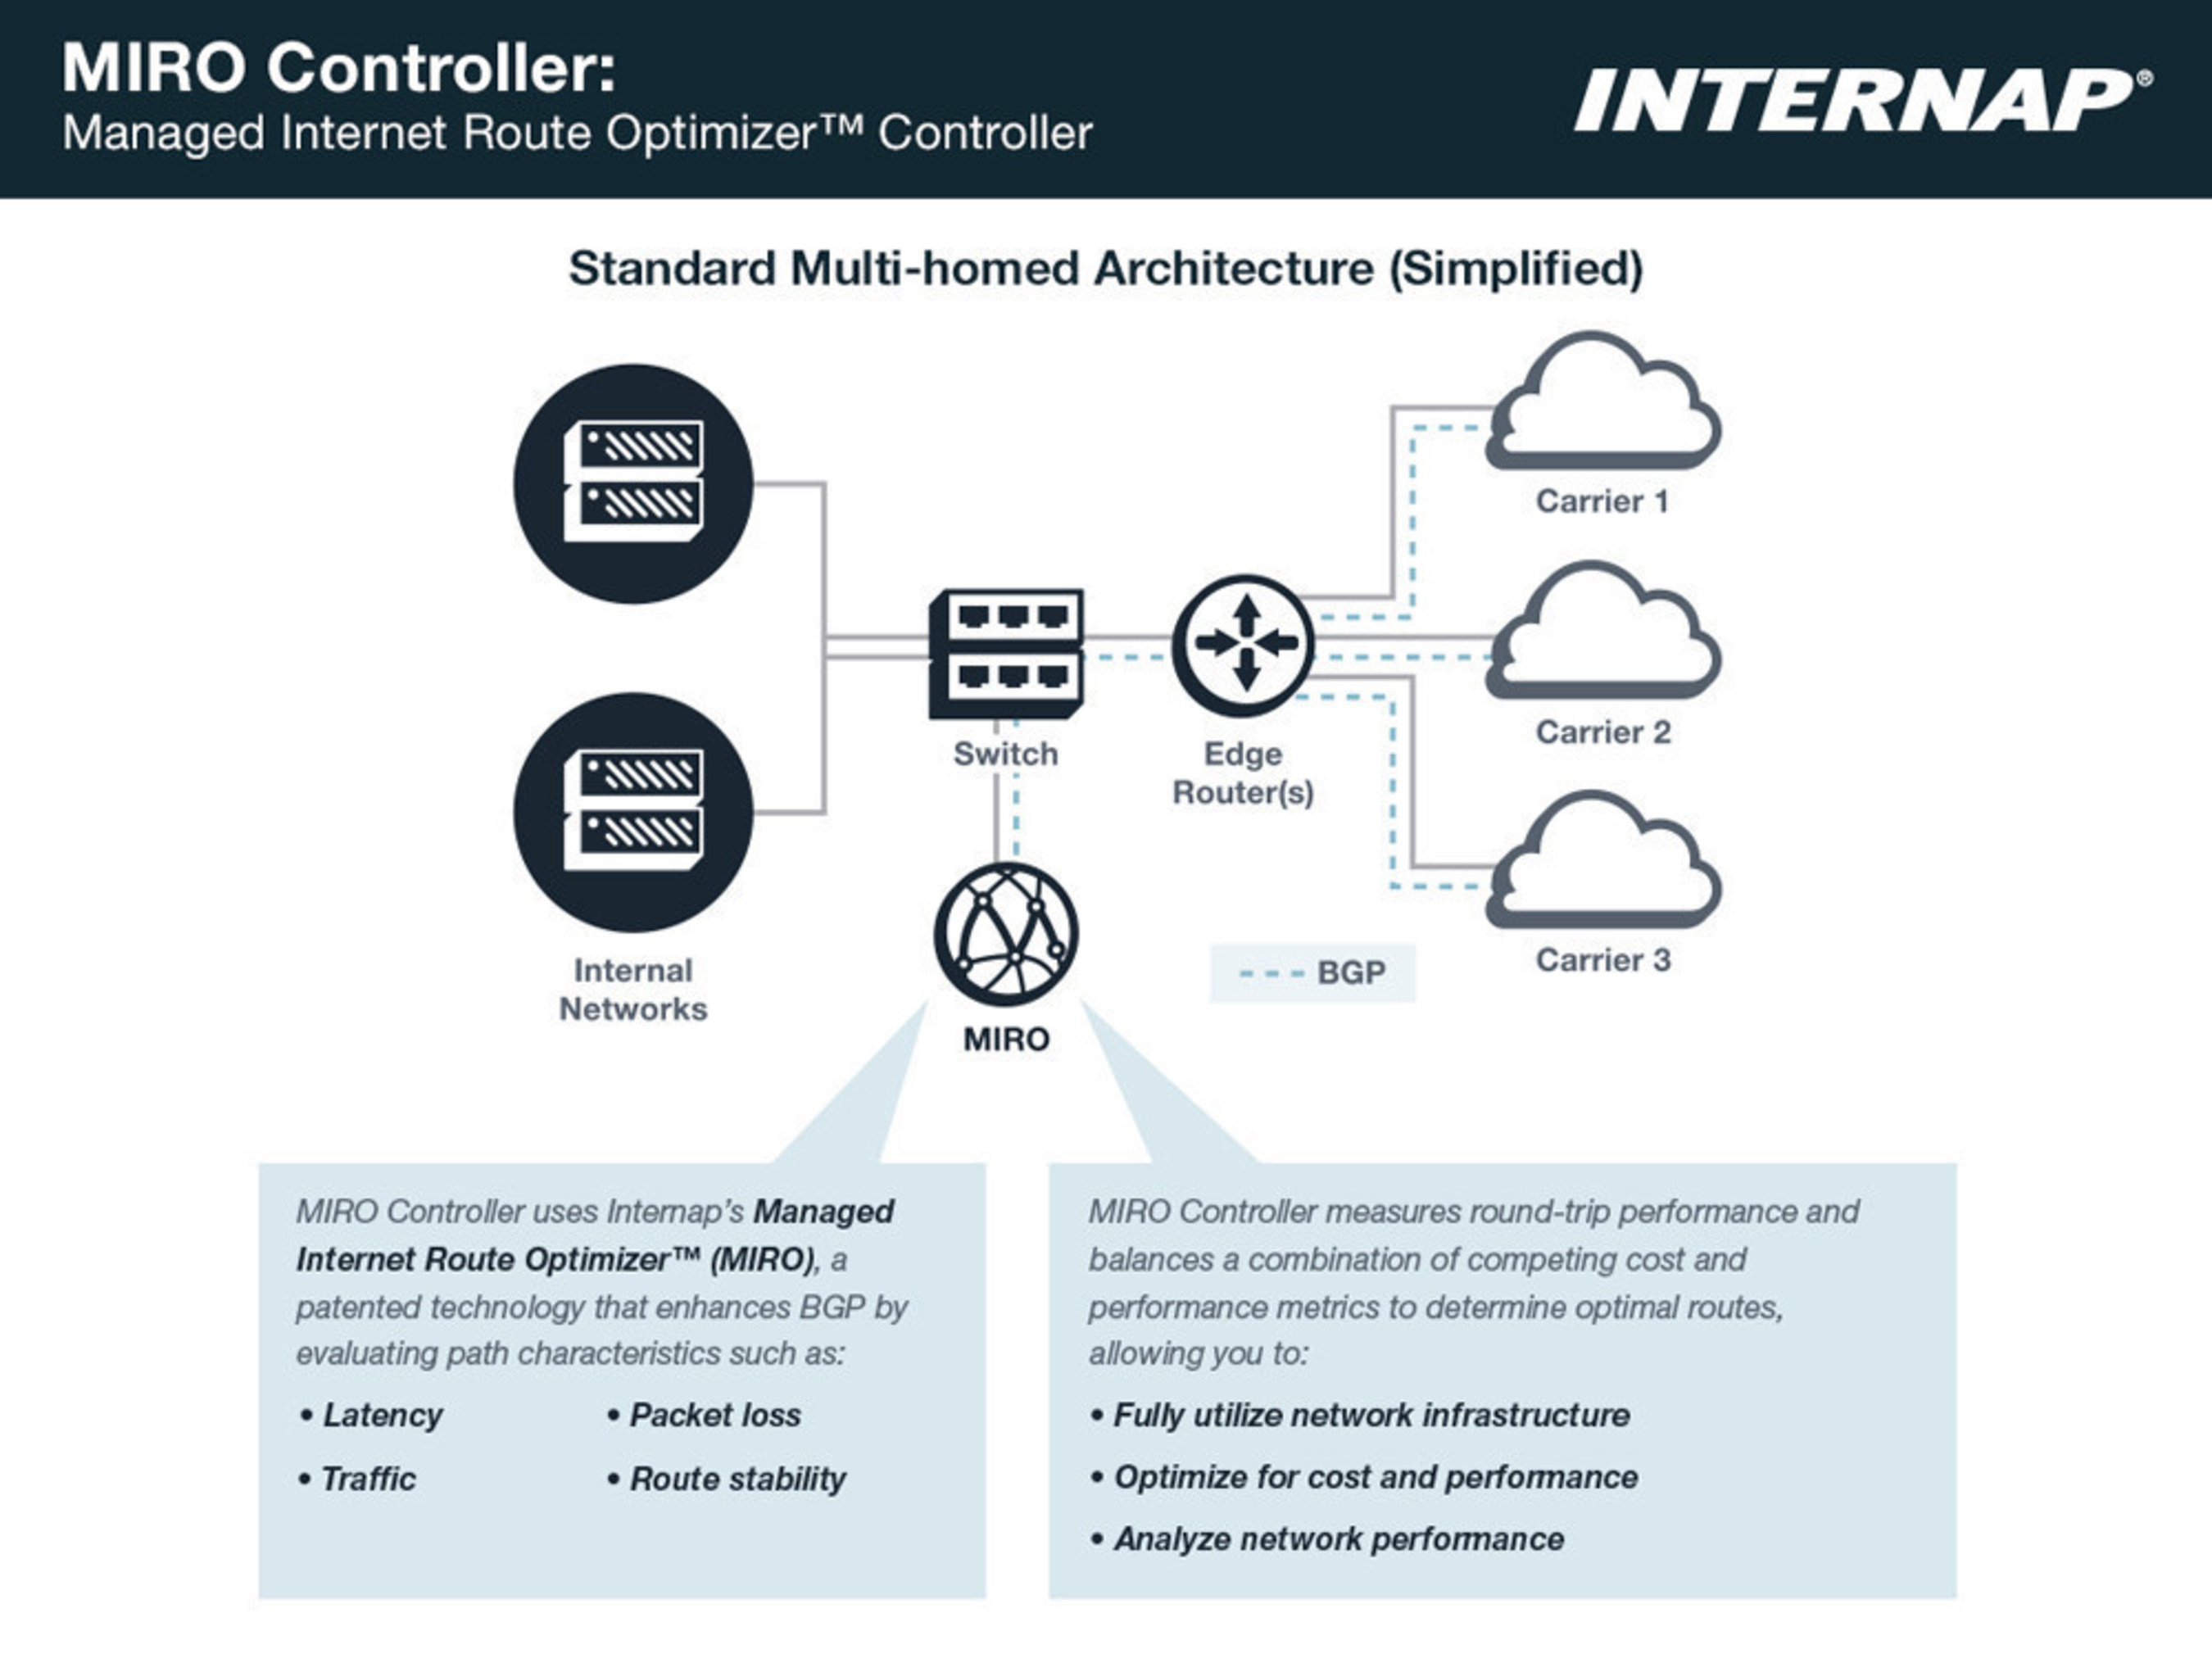 Internap's MIRO Controller is an on-premise appliance that automates traffic routing, helping enterprises and service providers more easily achieve optimal network performance and cost-efficiency.